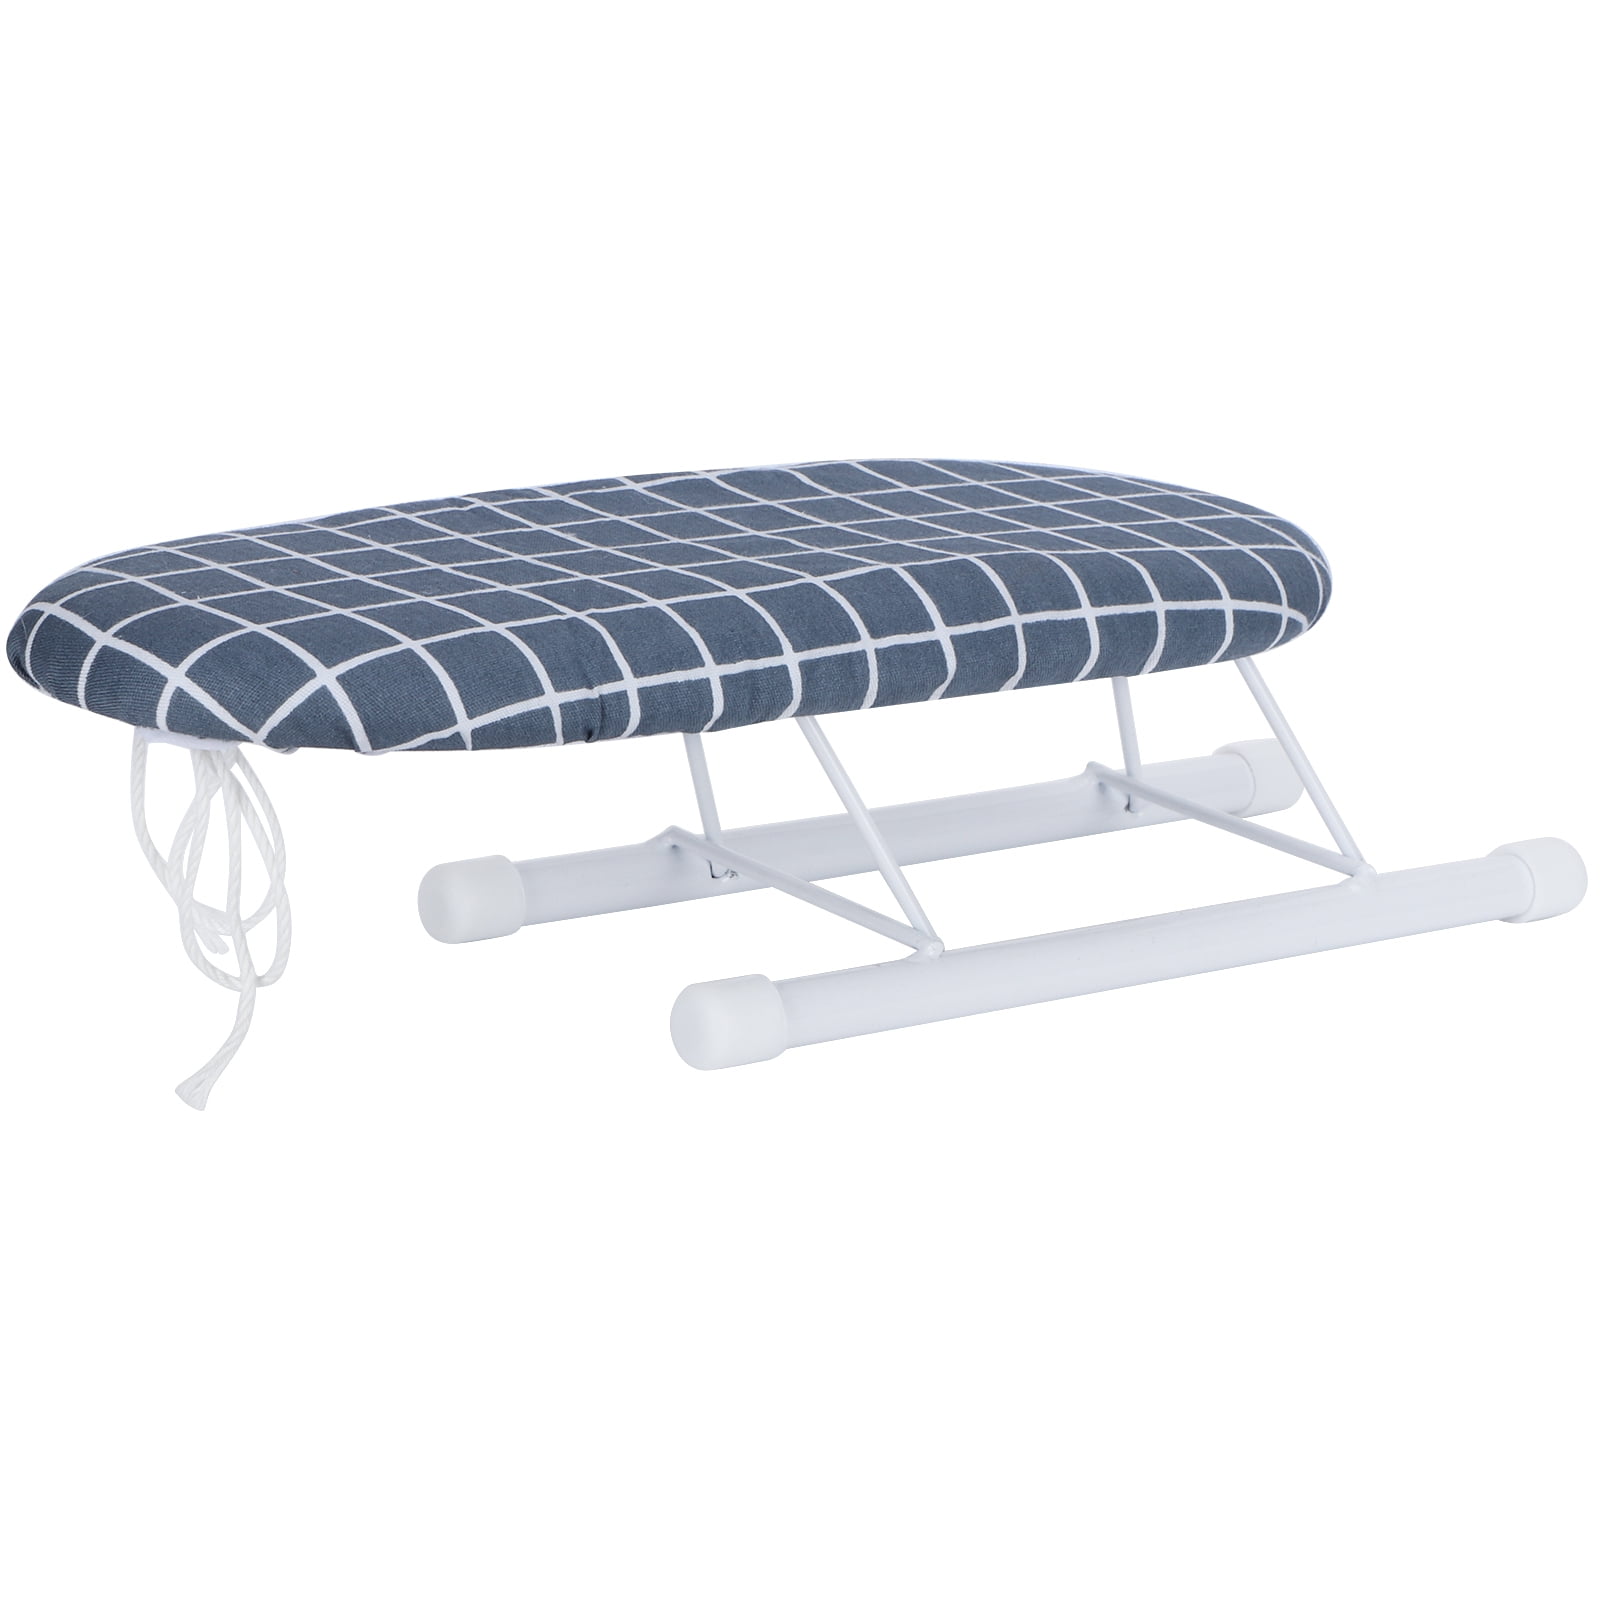 Ironing Table Durable Folding Ironing Board Anti-scalding Silver Cloth Smooth Thickened 